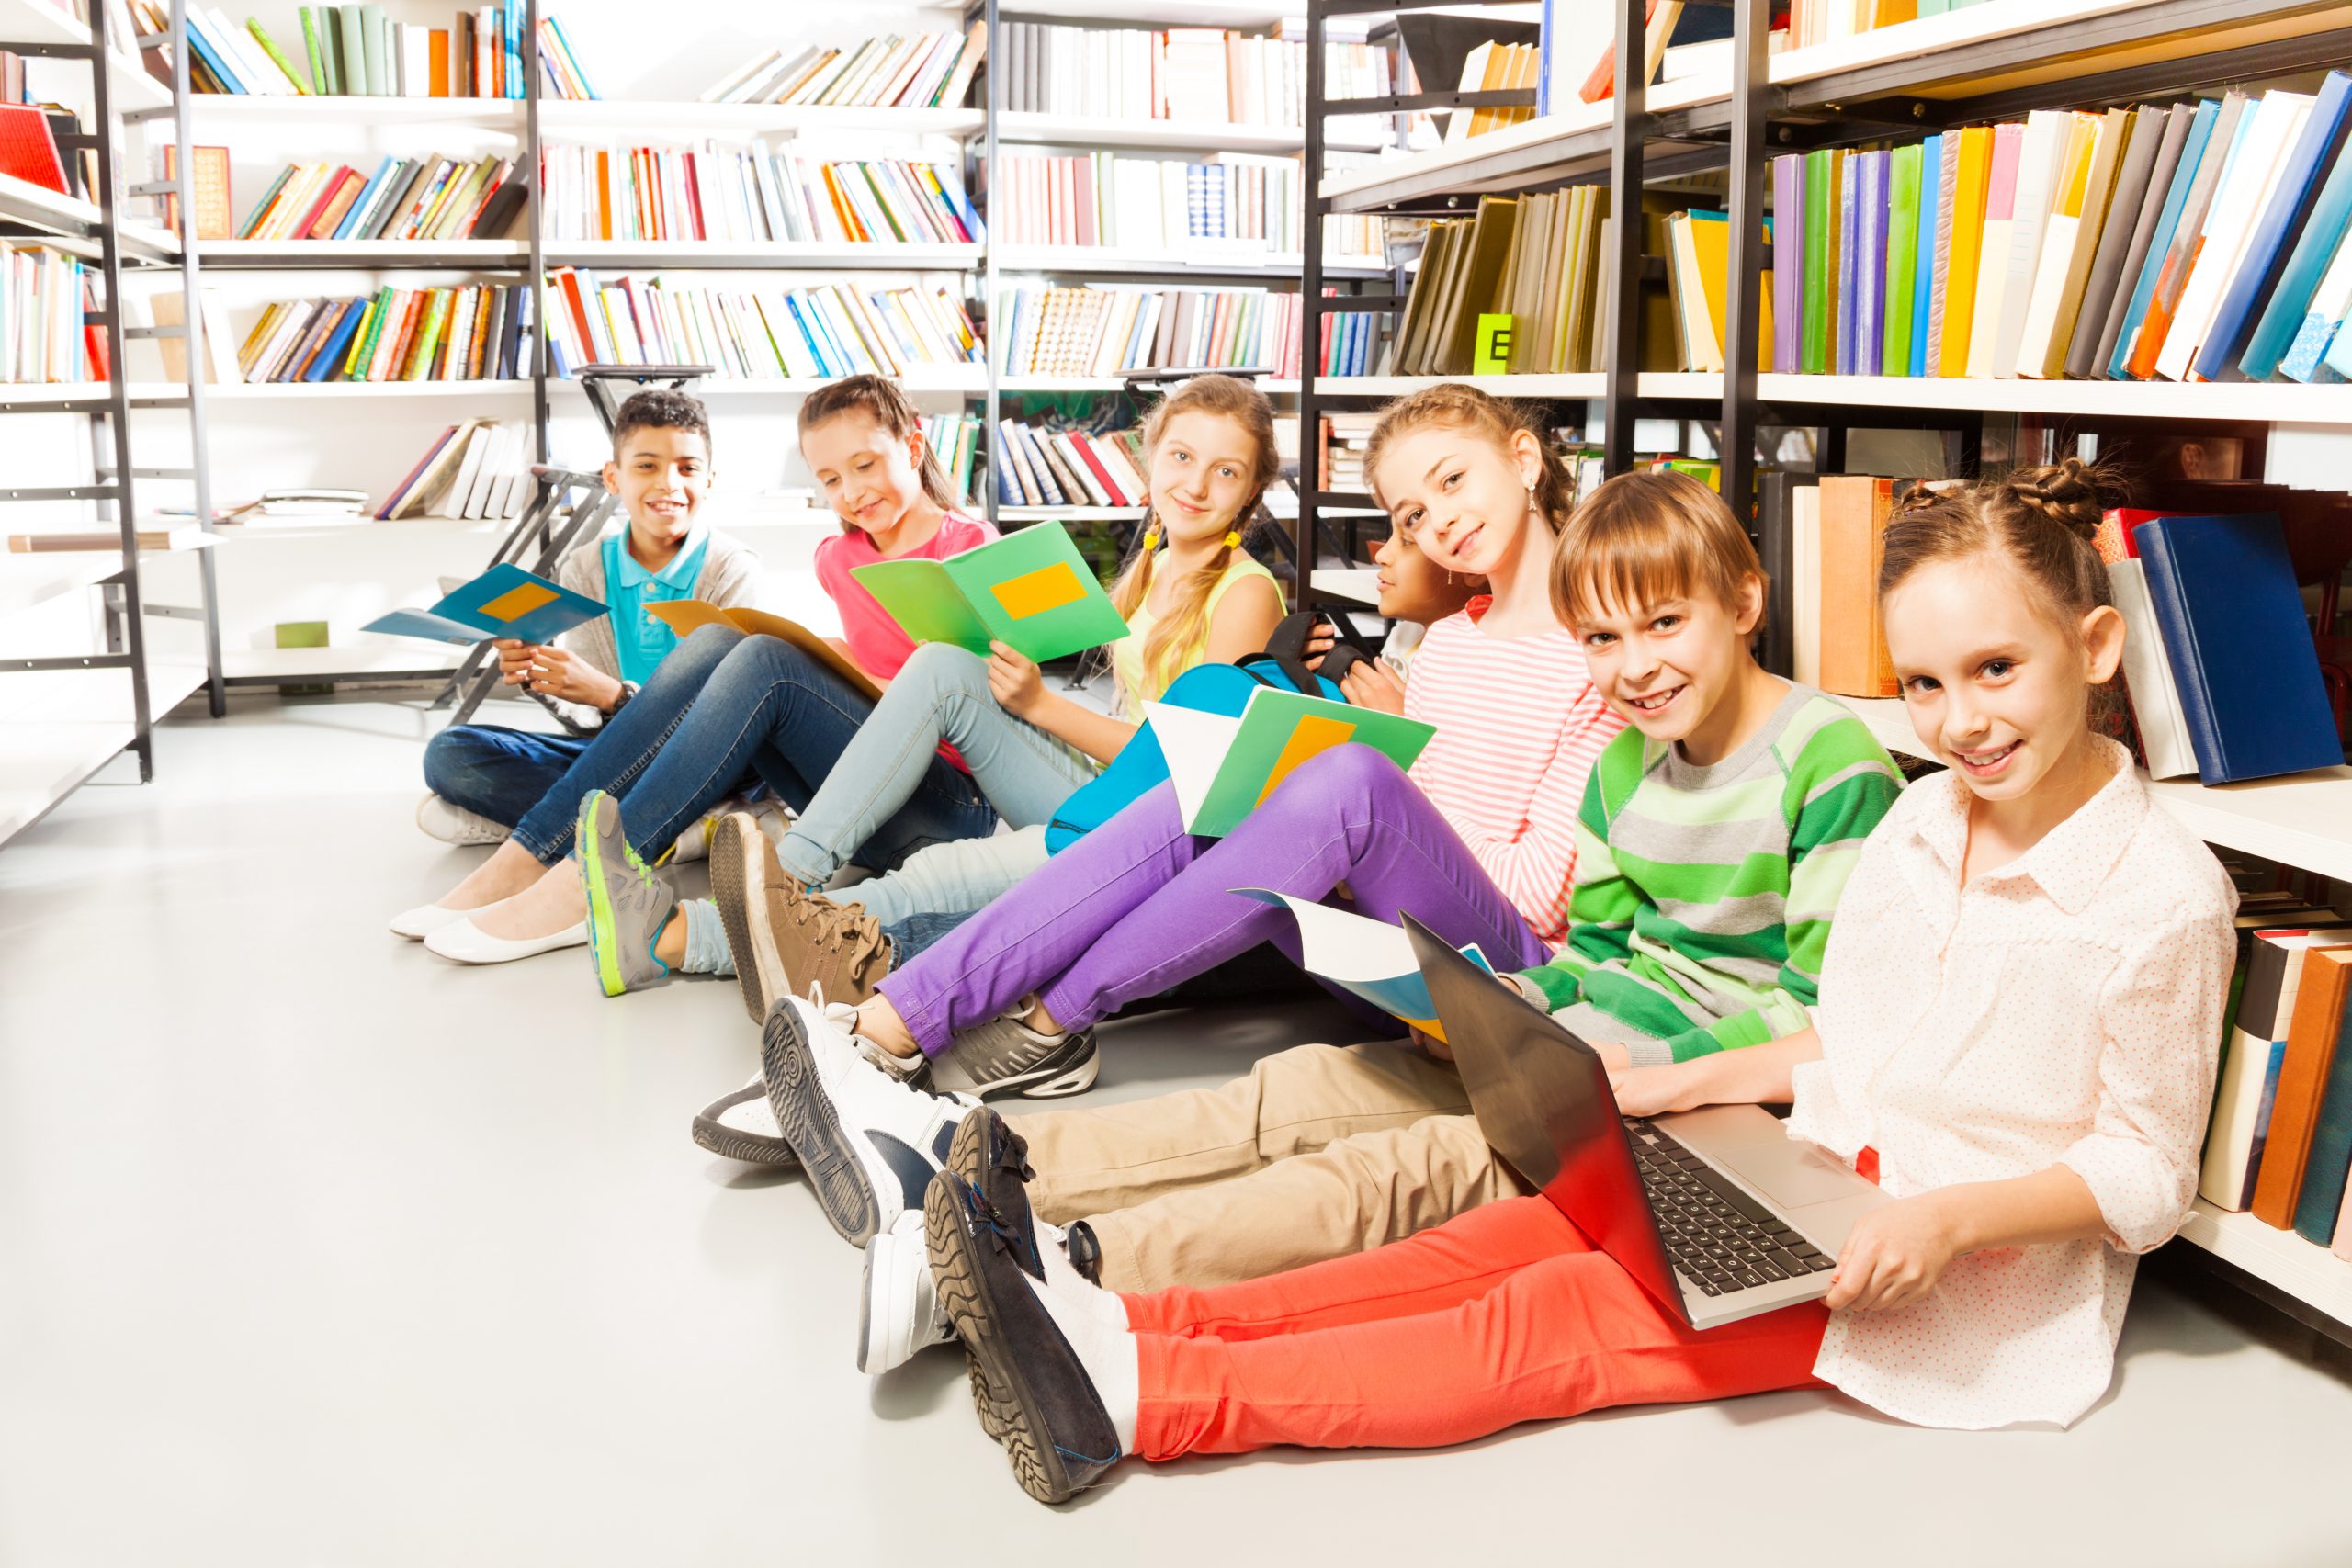 Six smiling children sitting in a row on floor in the library near bookshelf and looking straight